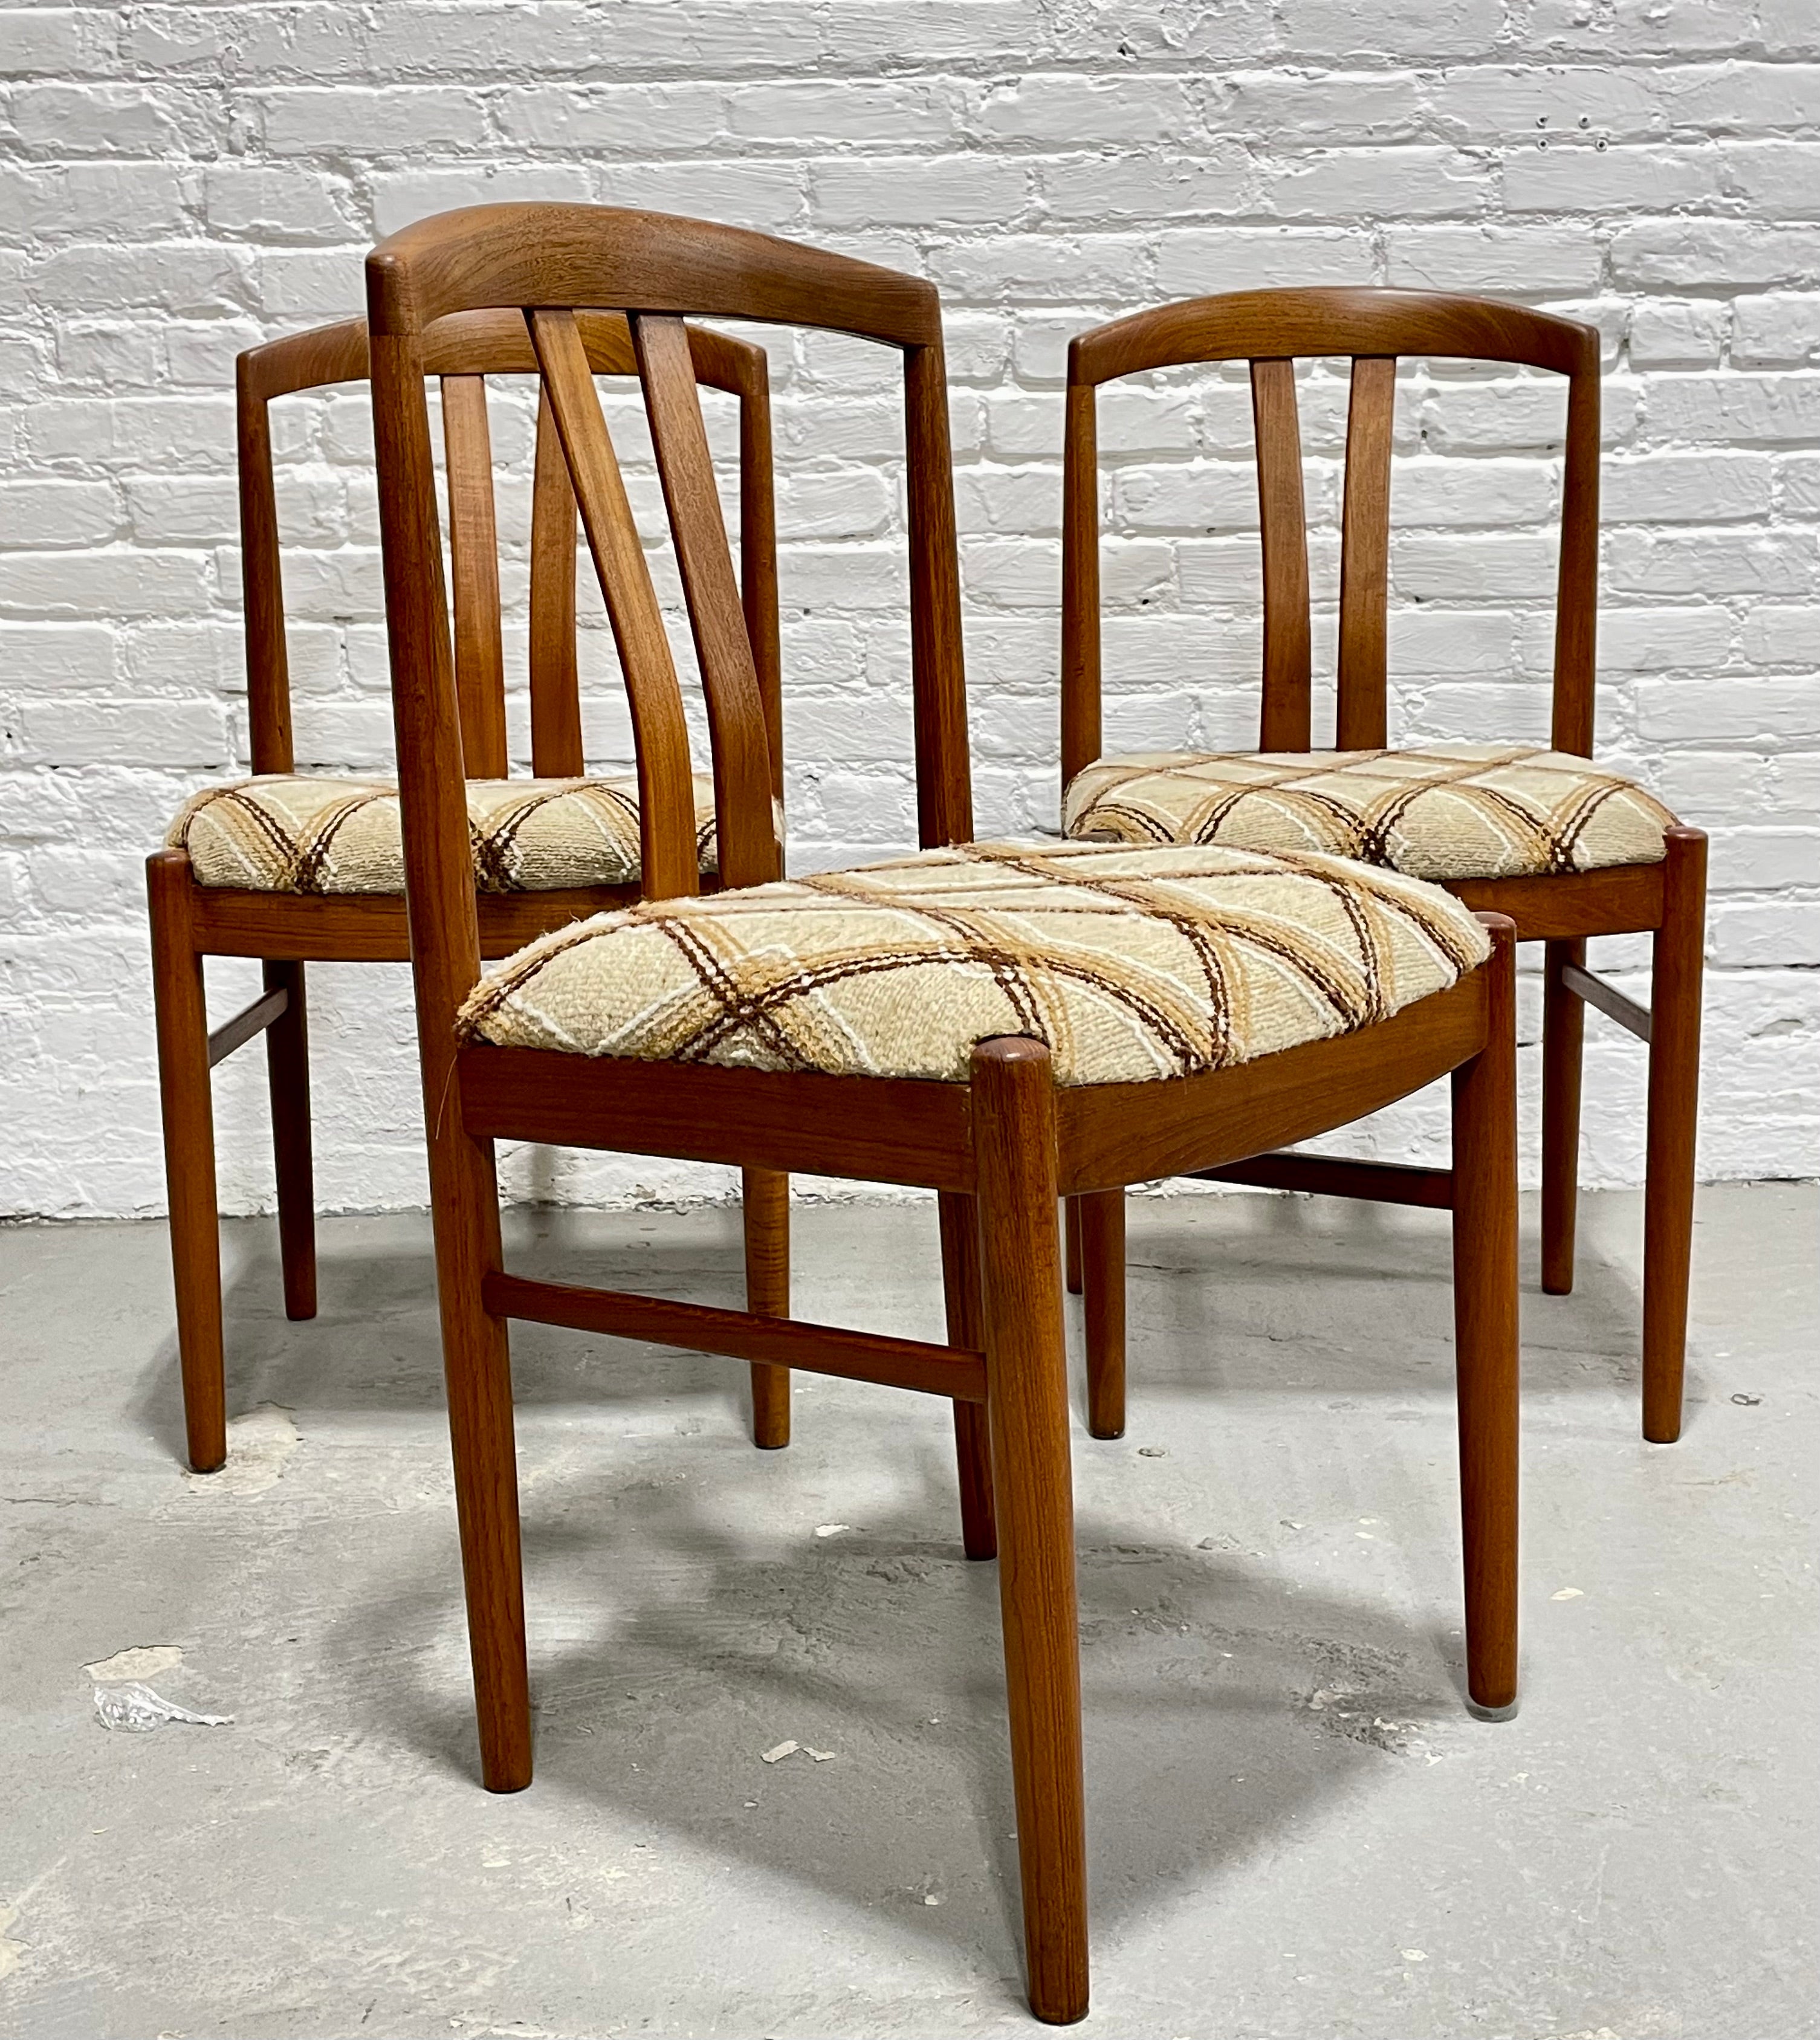 Mid Century Modern TRIO of Teak DINING CHAIRS by Carl Ekstrom for Albin Johansson, Made in Sweden, c. 1960's